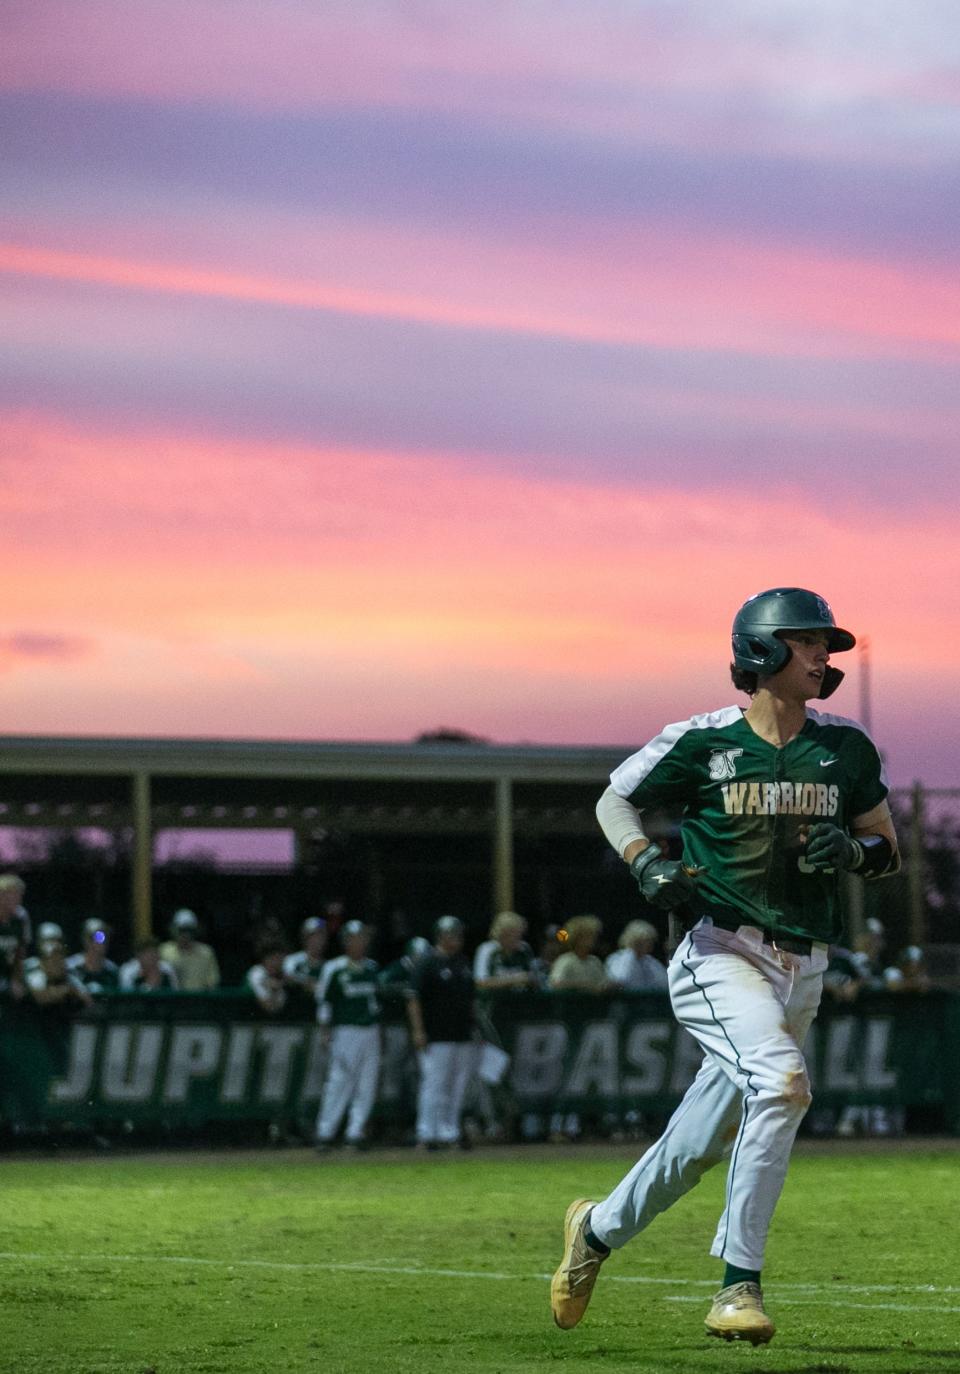 Jupiter third baseman Jake Finnegan (30) runs to first base during the District 11-7A championship baseball game between host Jupiter and Palm Beach Central on Thursday, May 4, 2023, in Jupiter, Fla. Final score, Jupiter, 11, Palm Beach Central, 3.